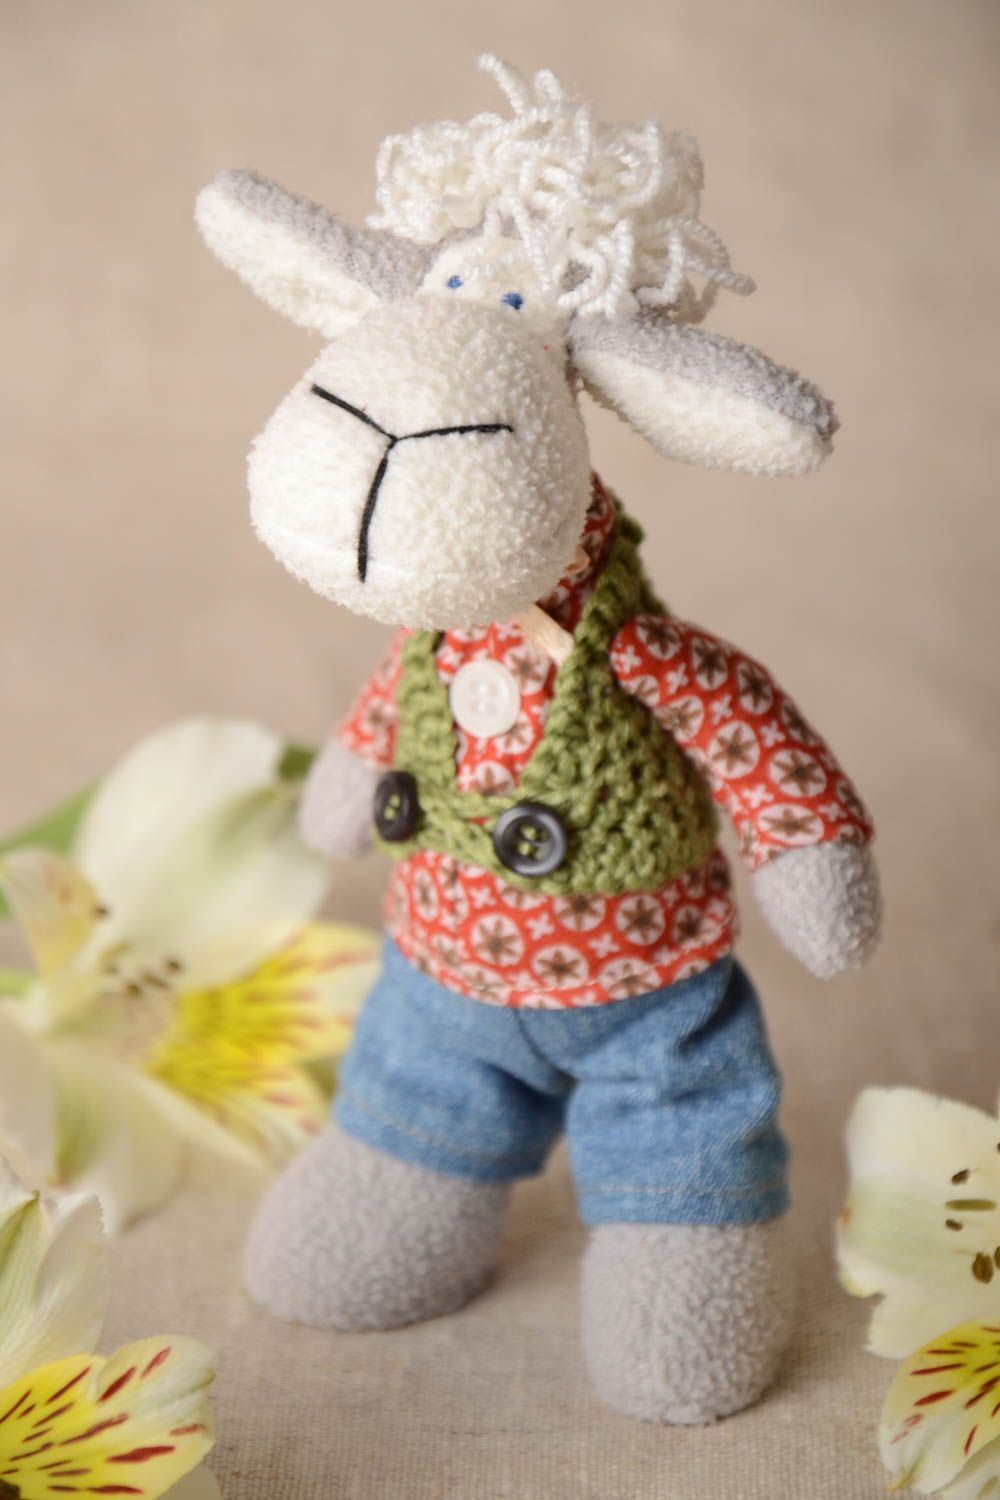 Felt handmade toy little lamb decorative interior doll for children and home photo 1